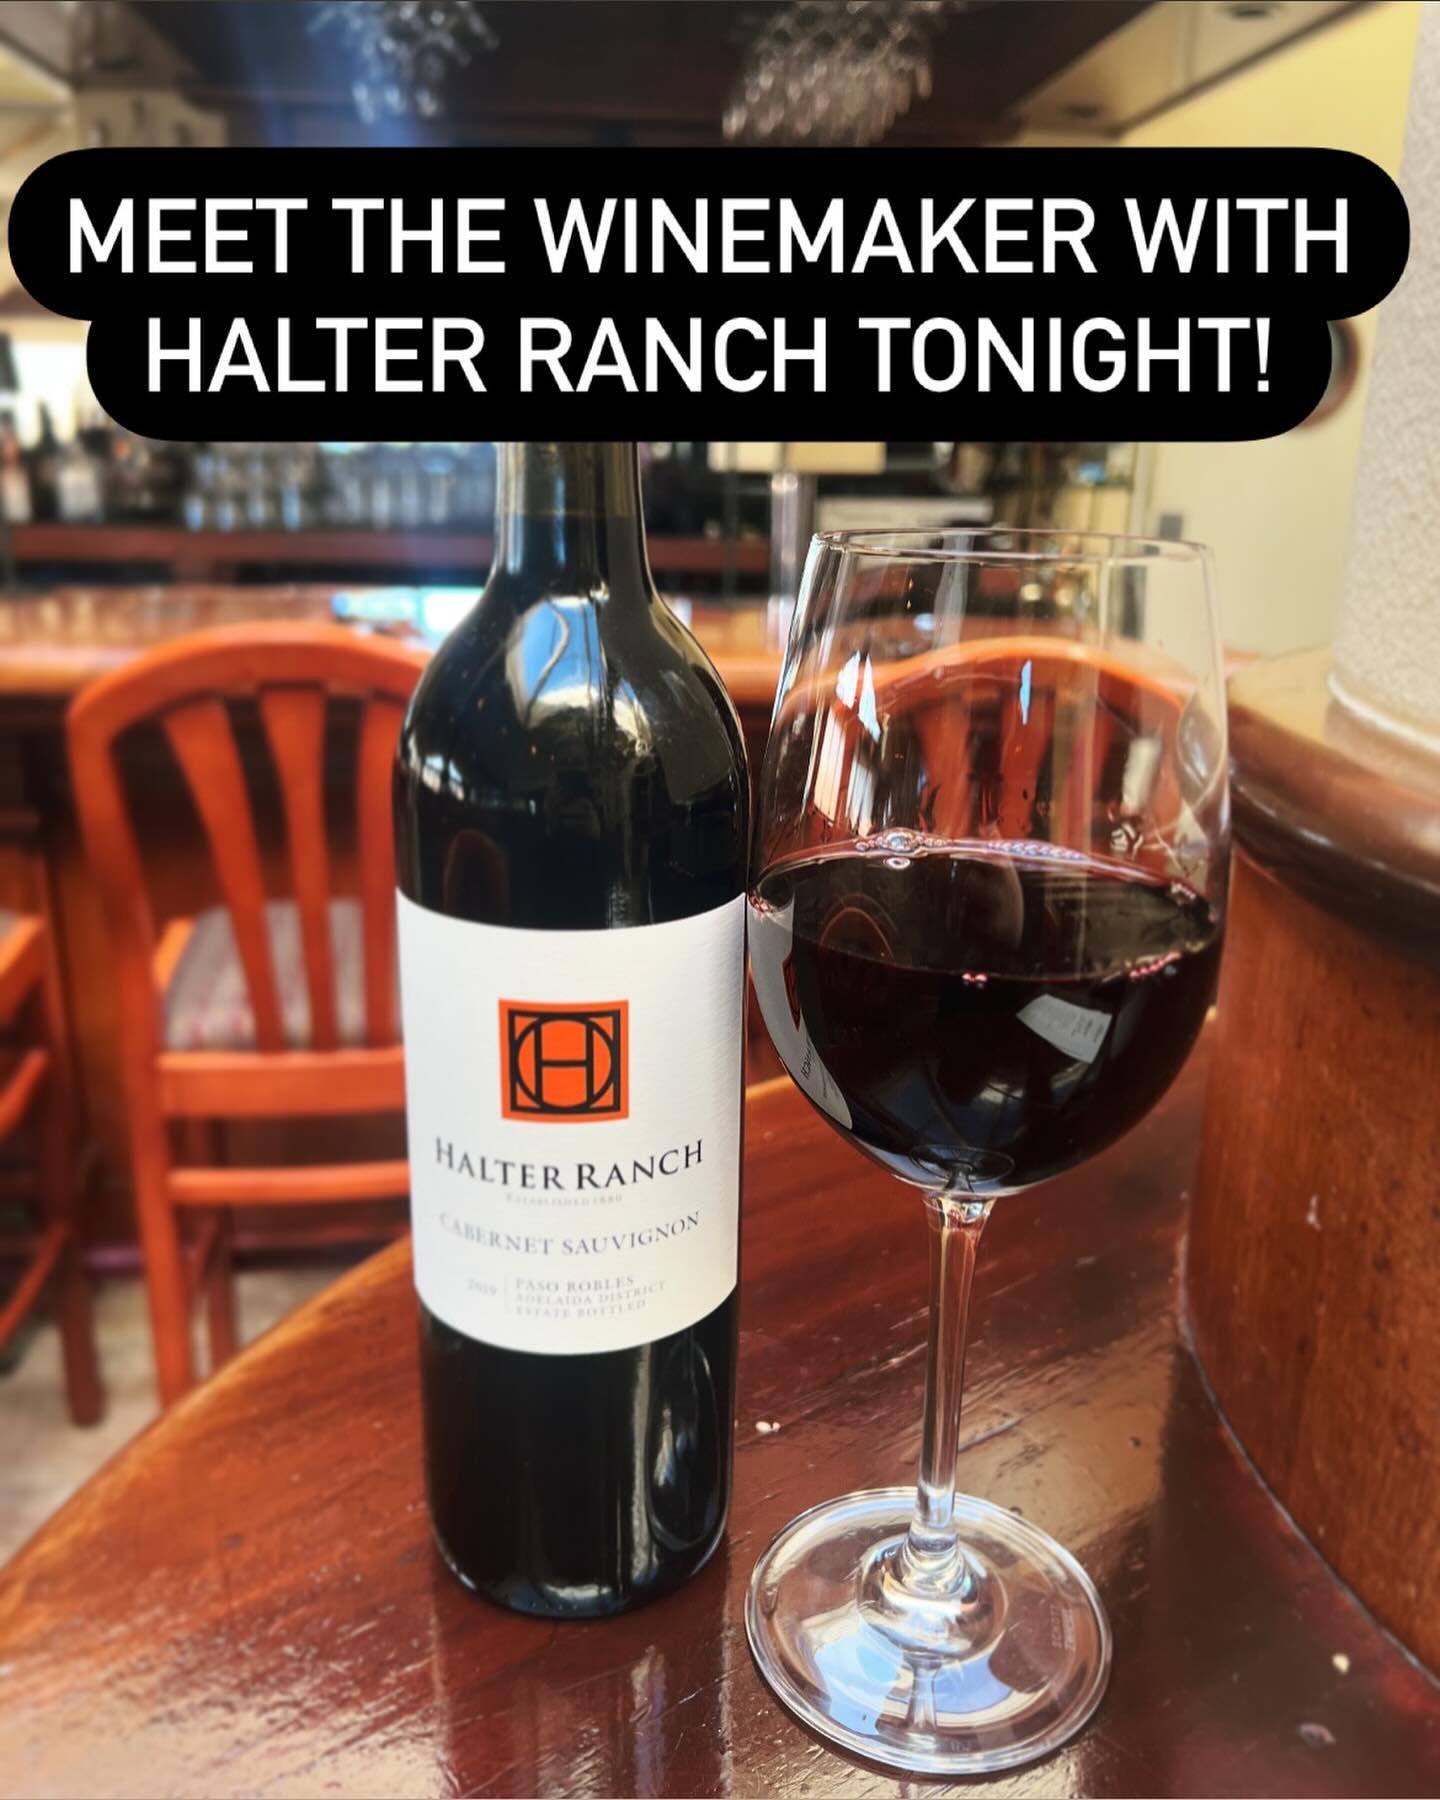 Friendly reminder that our next Meet the Winemaker is tonight! Kevin Sass of Halter Ranch will be pouring complimentary wine tastings from 5-7 pm.